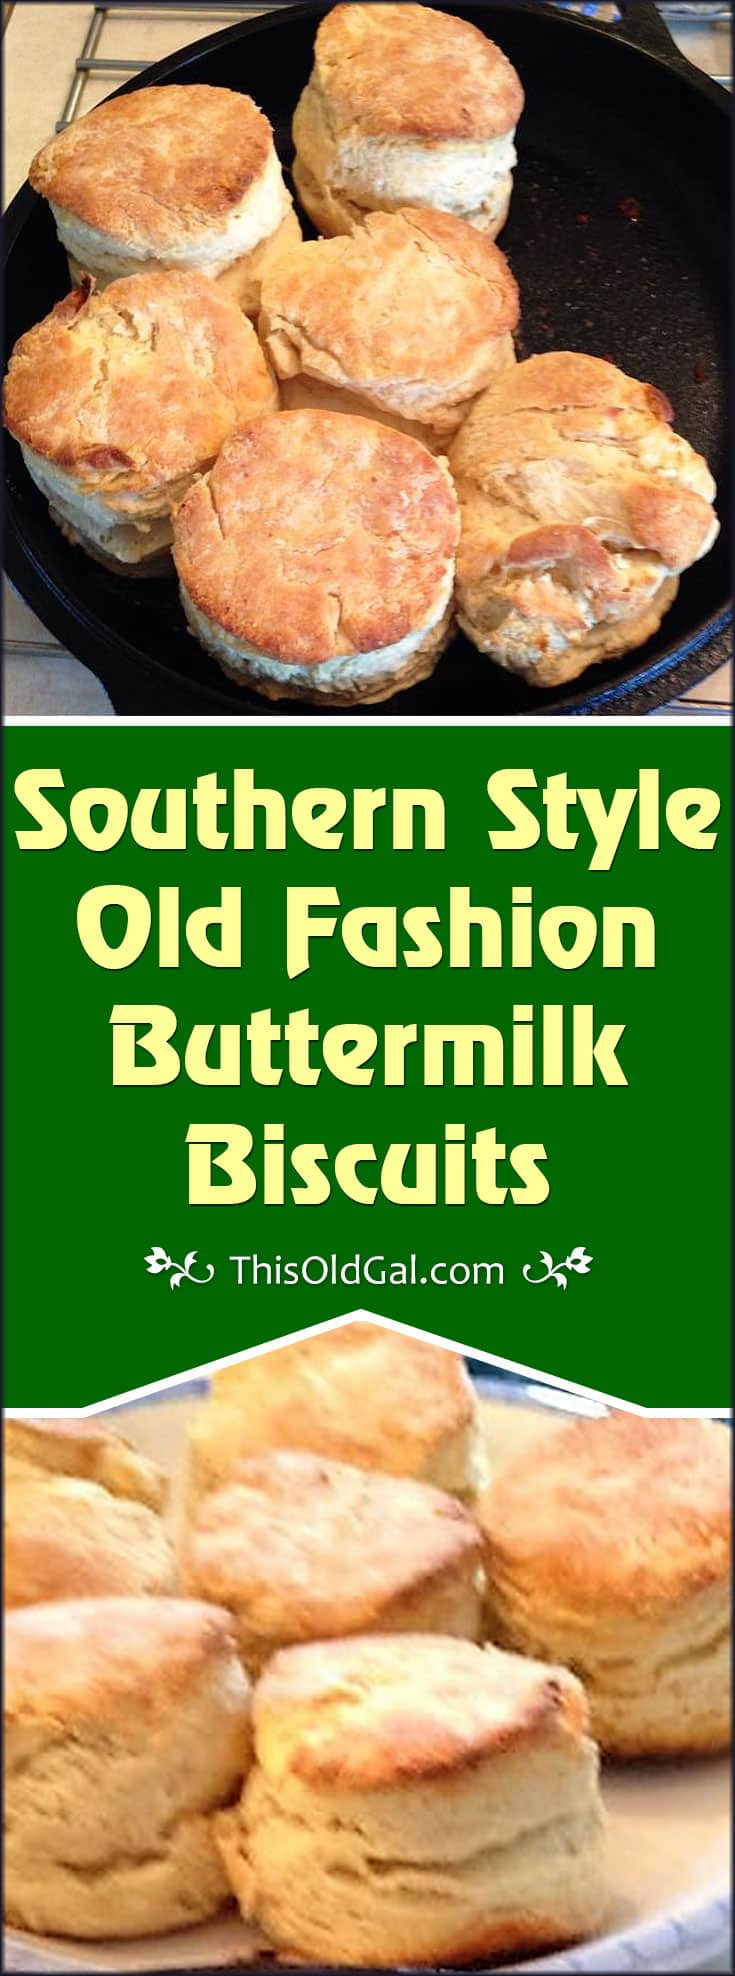 Mcdonald'S Southern Style Chicken Biscuit
 Southern Style Old Fashion Buttermilk Biscuits